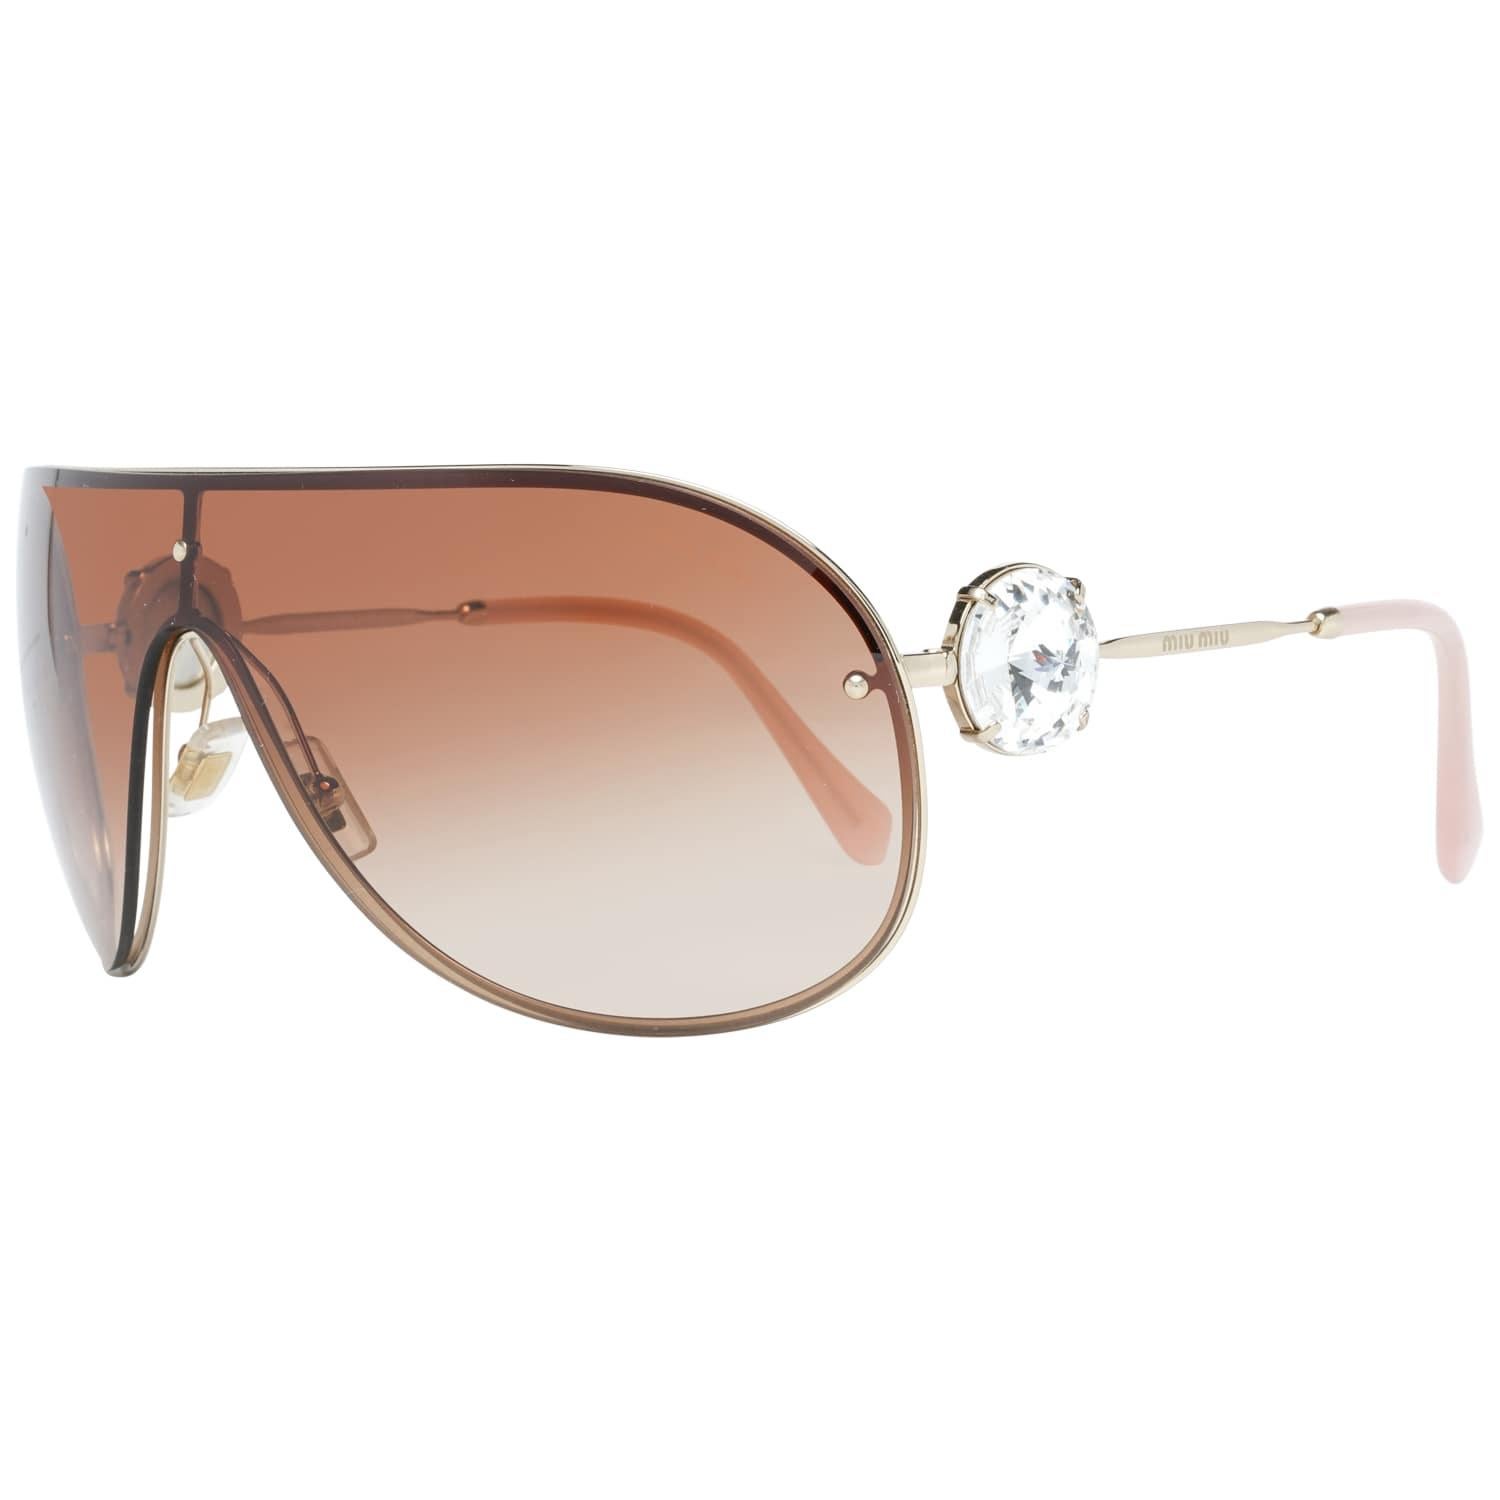 DetailsMATERIAL: MetalCOLOR: GoldMODEL: MU67US 37ZVN1Z1GENDER: WomenCOUNTRY OF MANUFACTURE: ItalyTYPE: SunglassesORIGINAL CASE?: YesSTYLE: Mono LensOCCASION: CasualFEATURES: LightweightLENS COLOR: BrownLENS TECHNOLOGY: GradientYEAR MANUFACTURED: